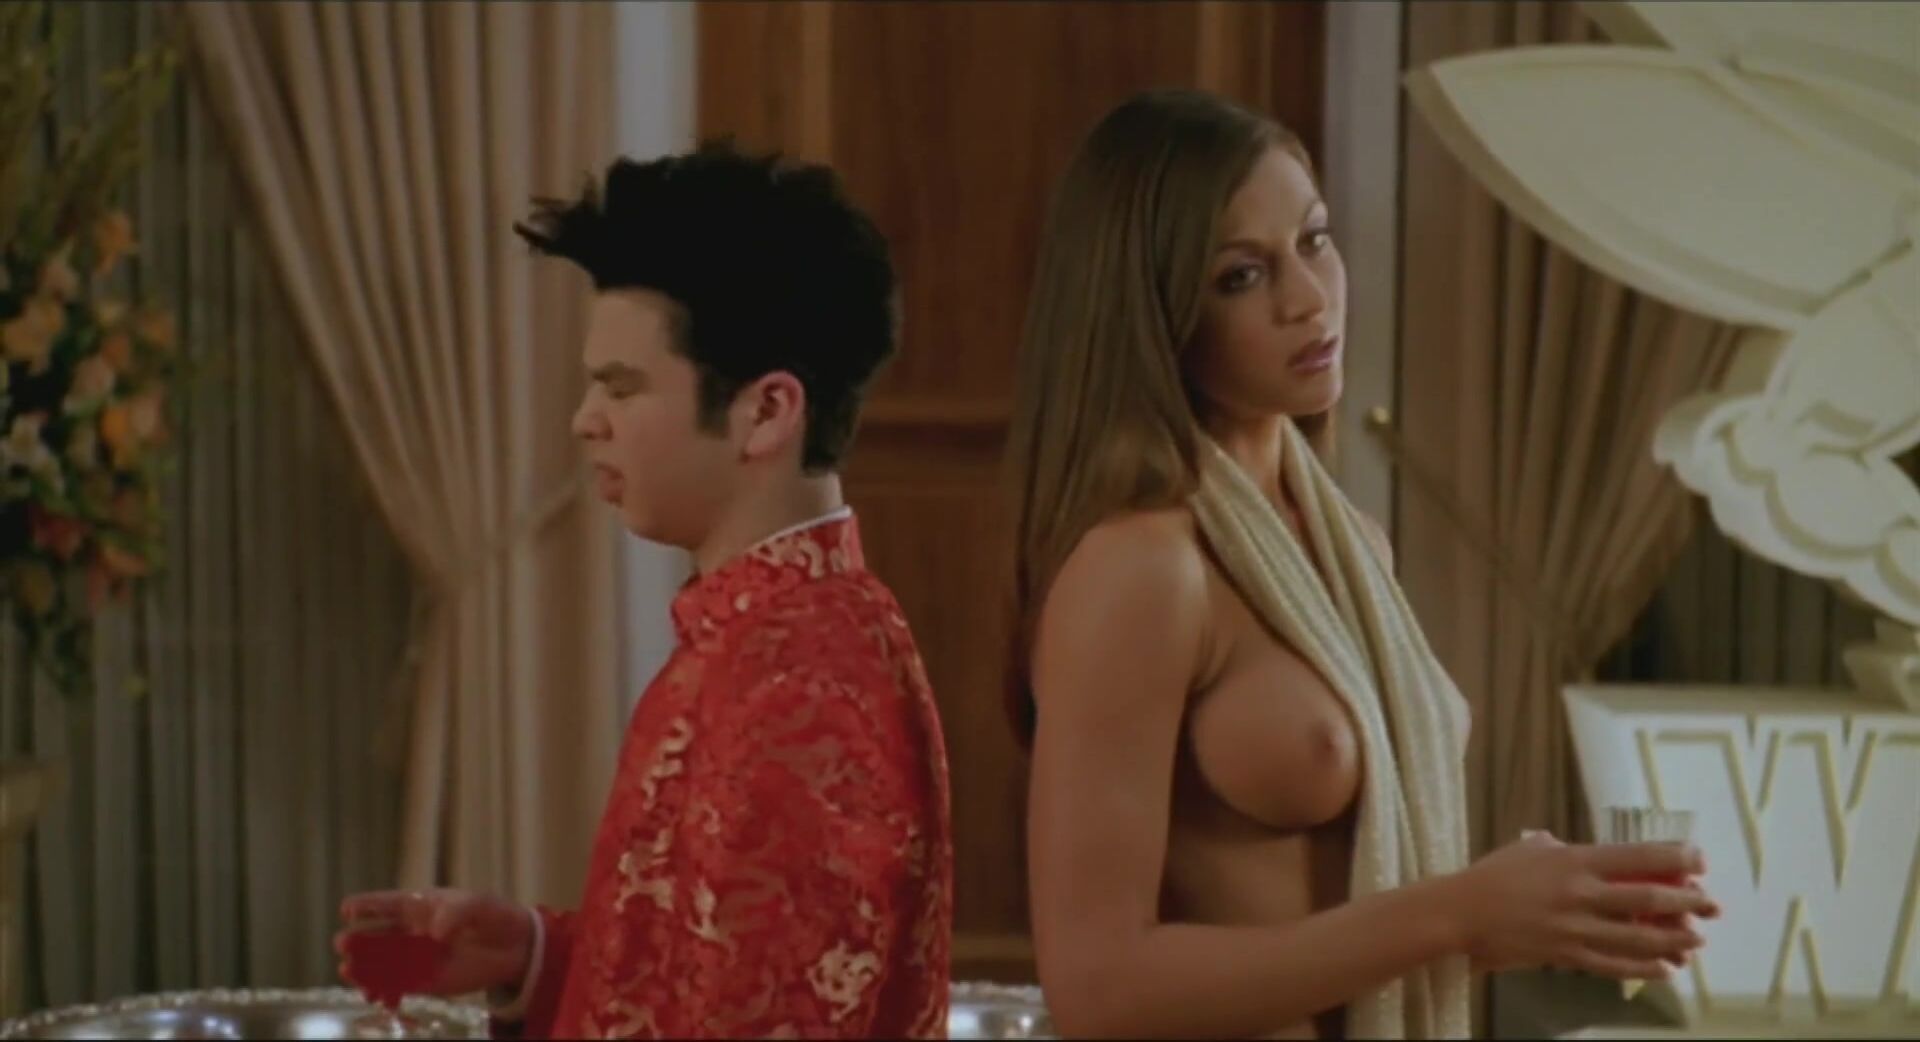 Swedish Slender Cerina Vincent dislikes wearing clothes in Not Another Teen Movie (2001) Blowjob porn